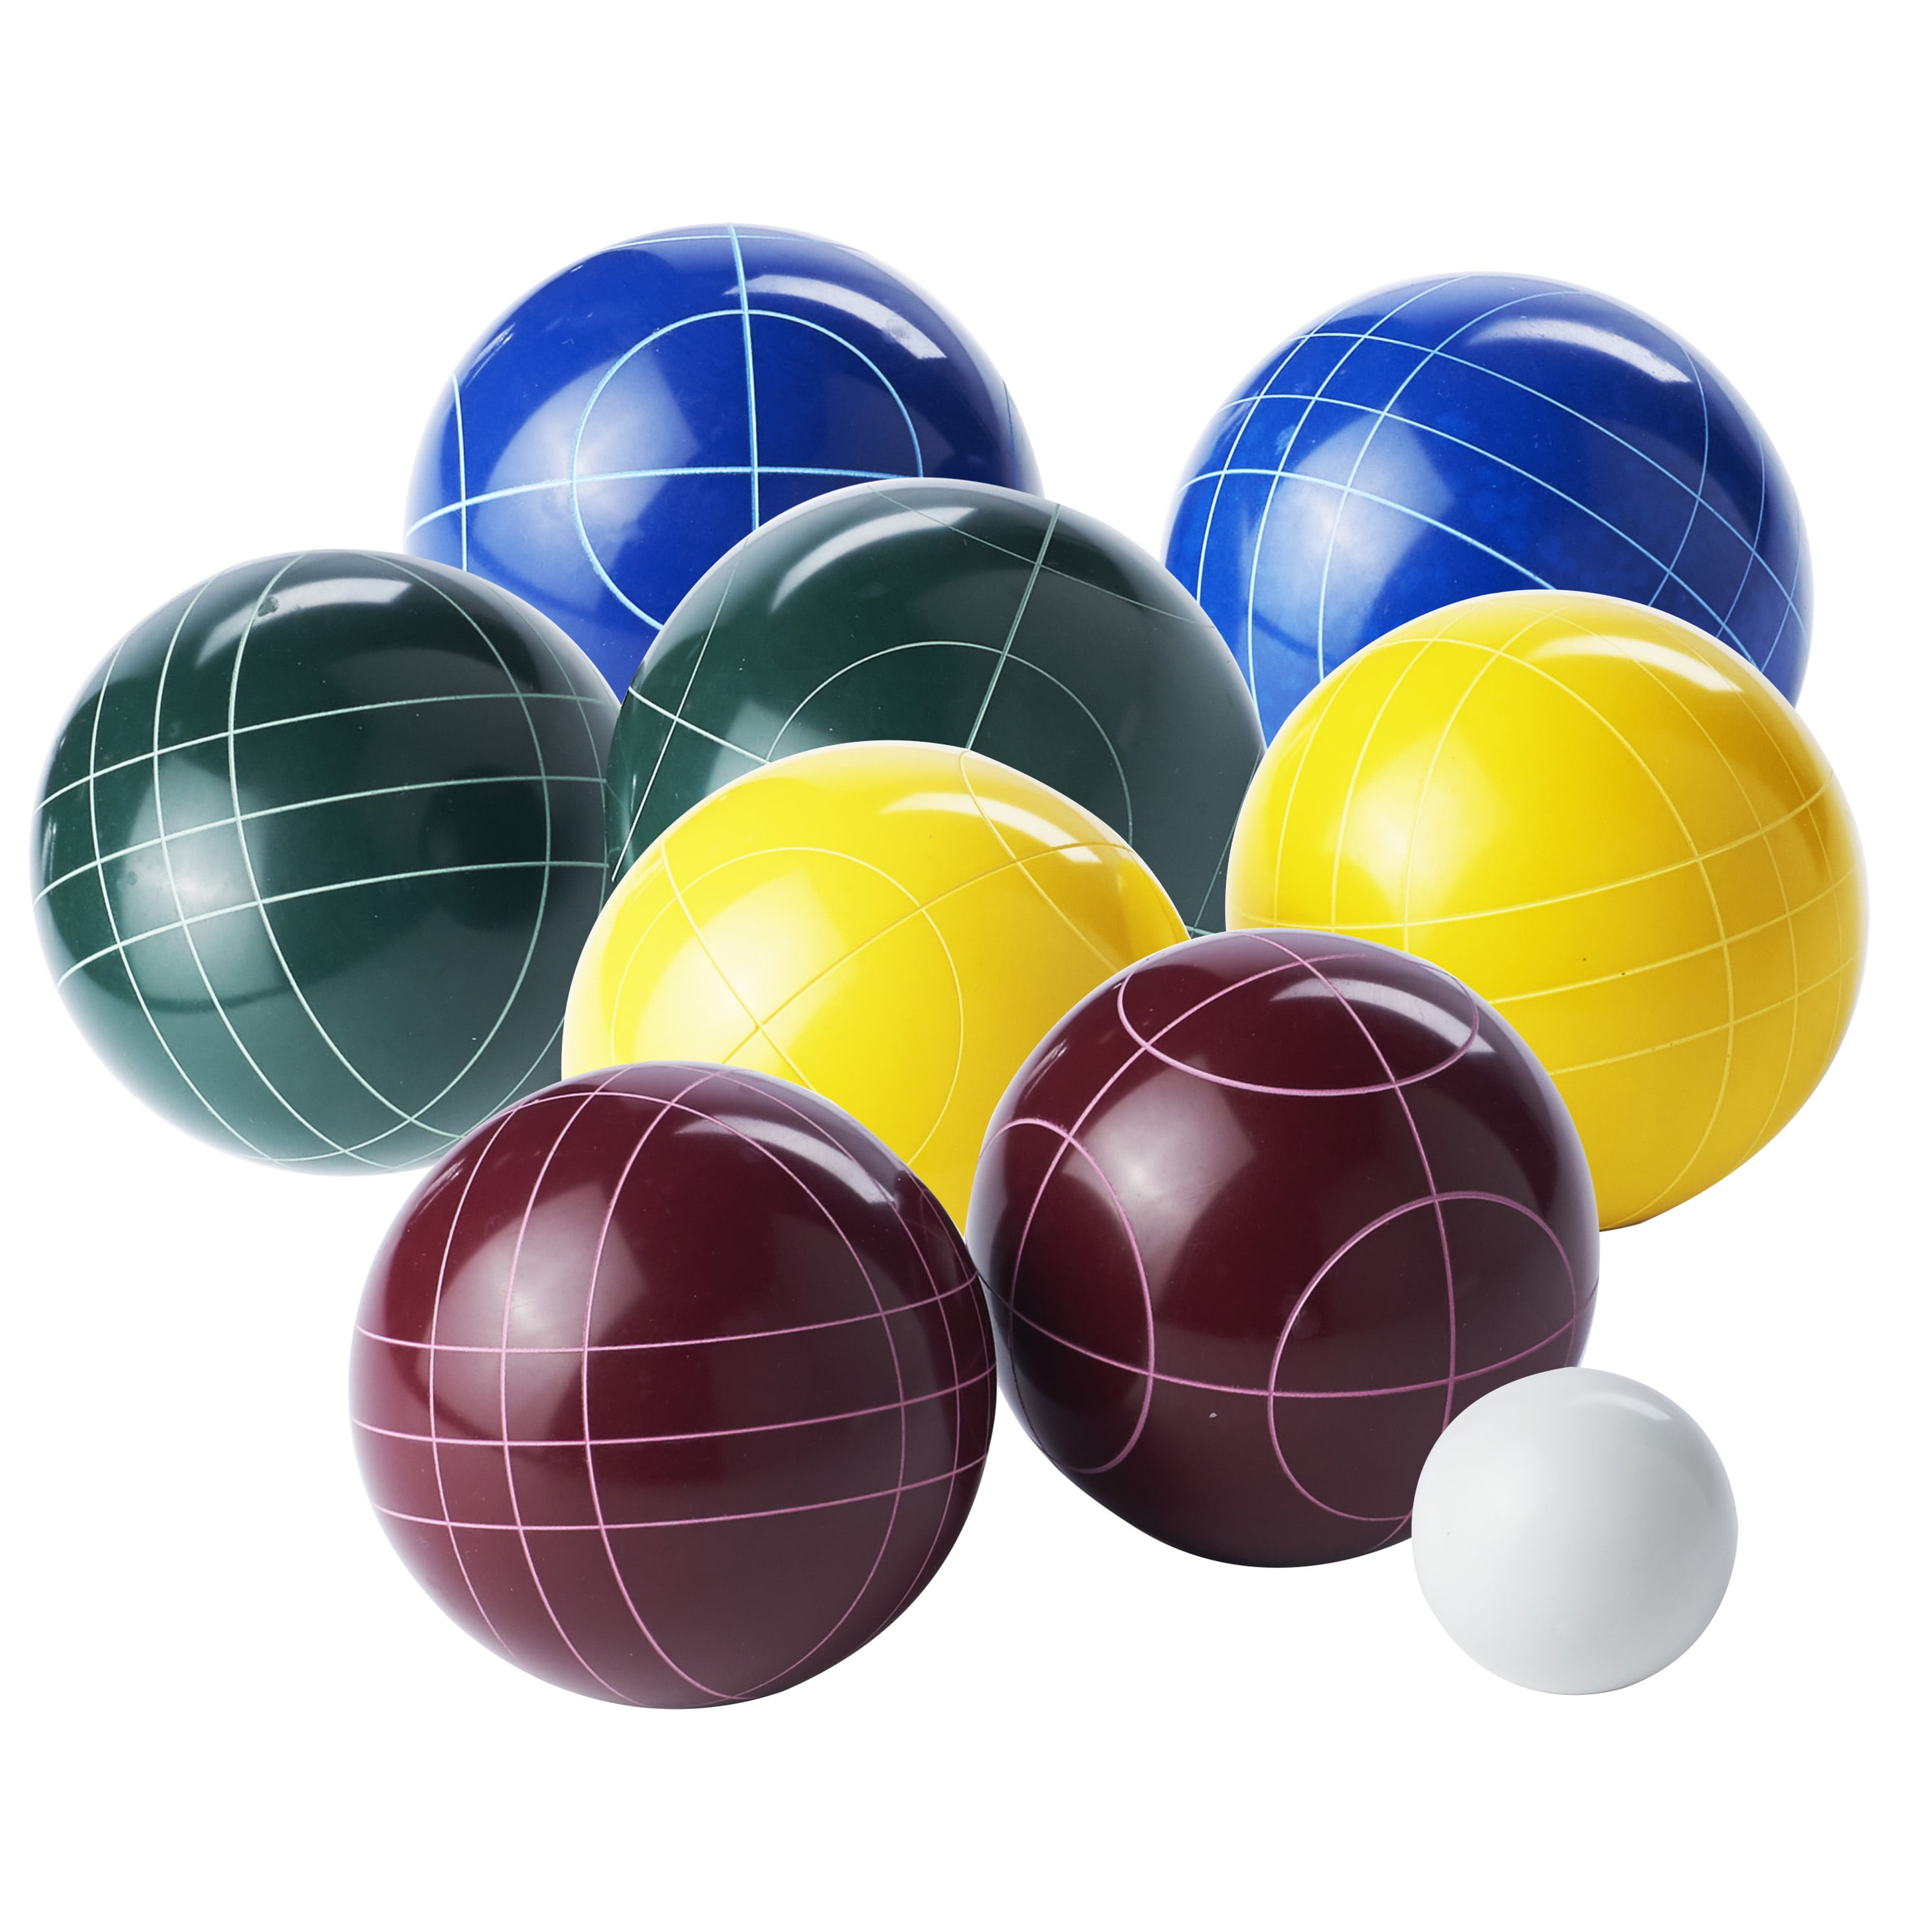 Bocce Deluxe Ball Set - 8 Lightweight Resin 90mm Balls & Carrying Case -  Classic Indoor & Outdoor Lawn Games - Sports Equipment for Beach, Backyard,  